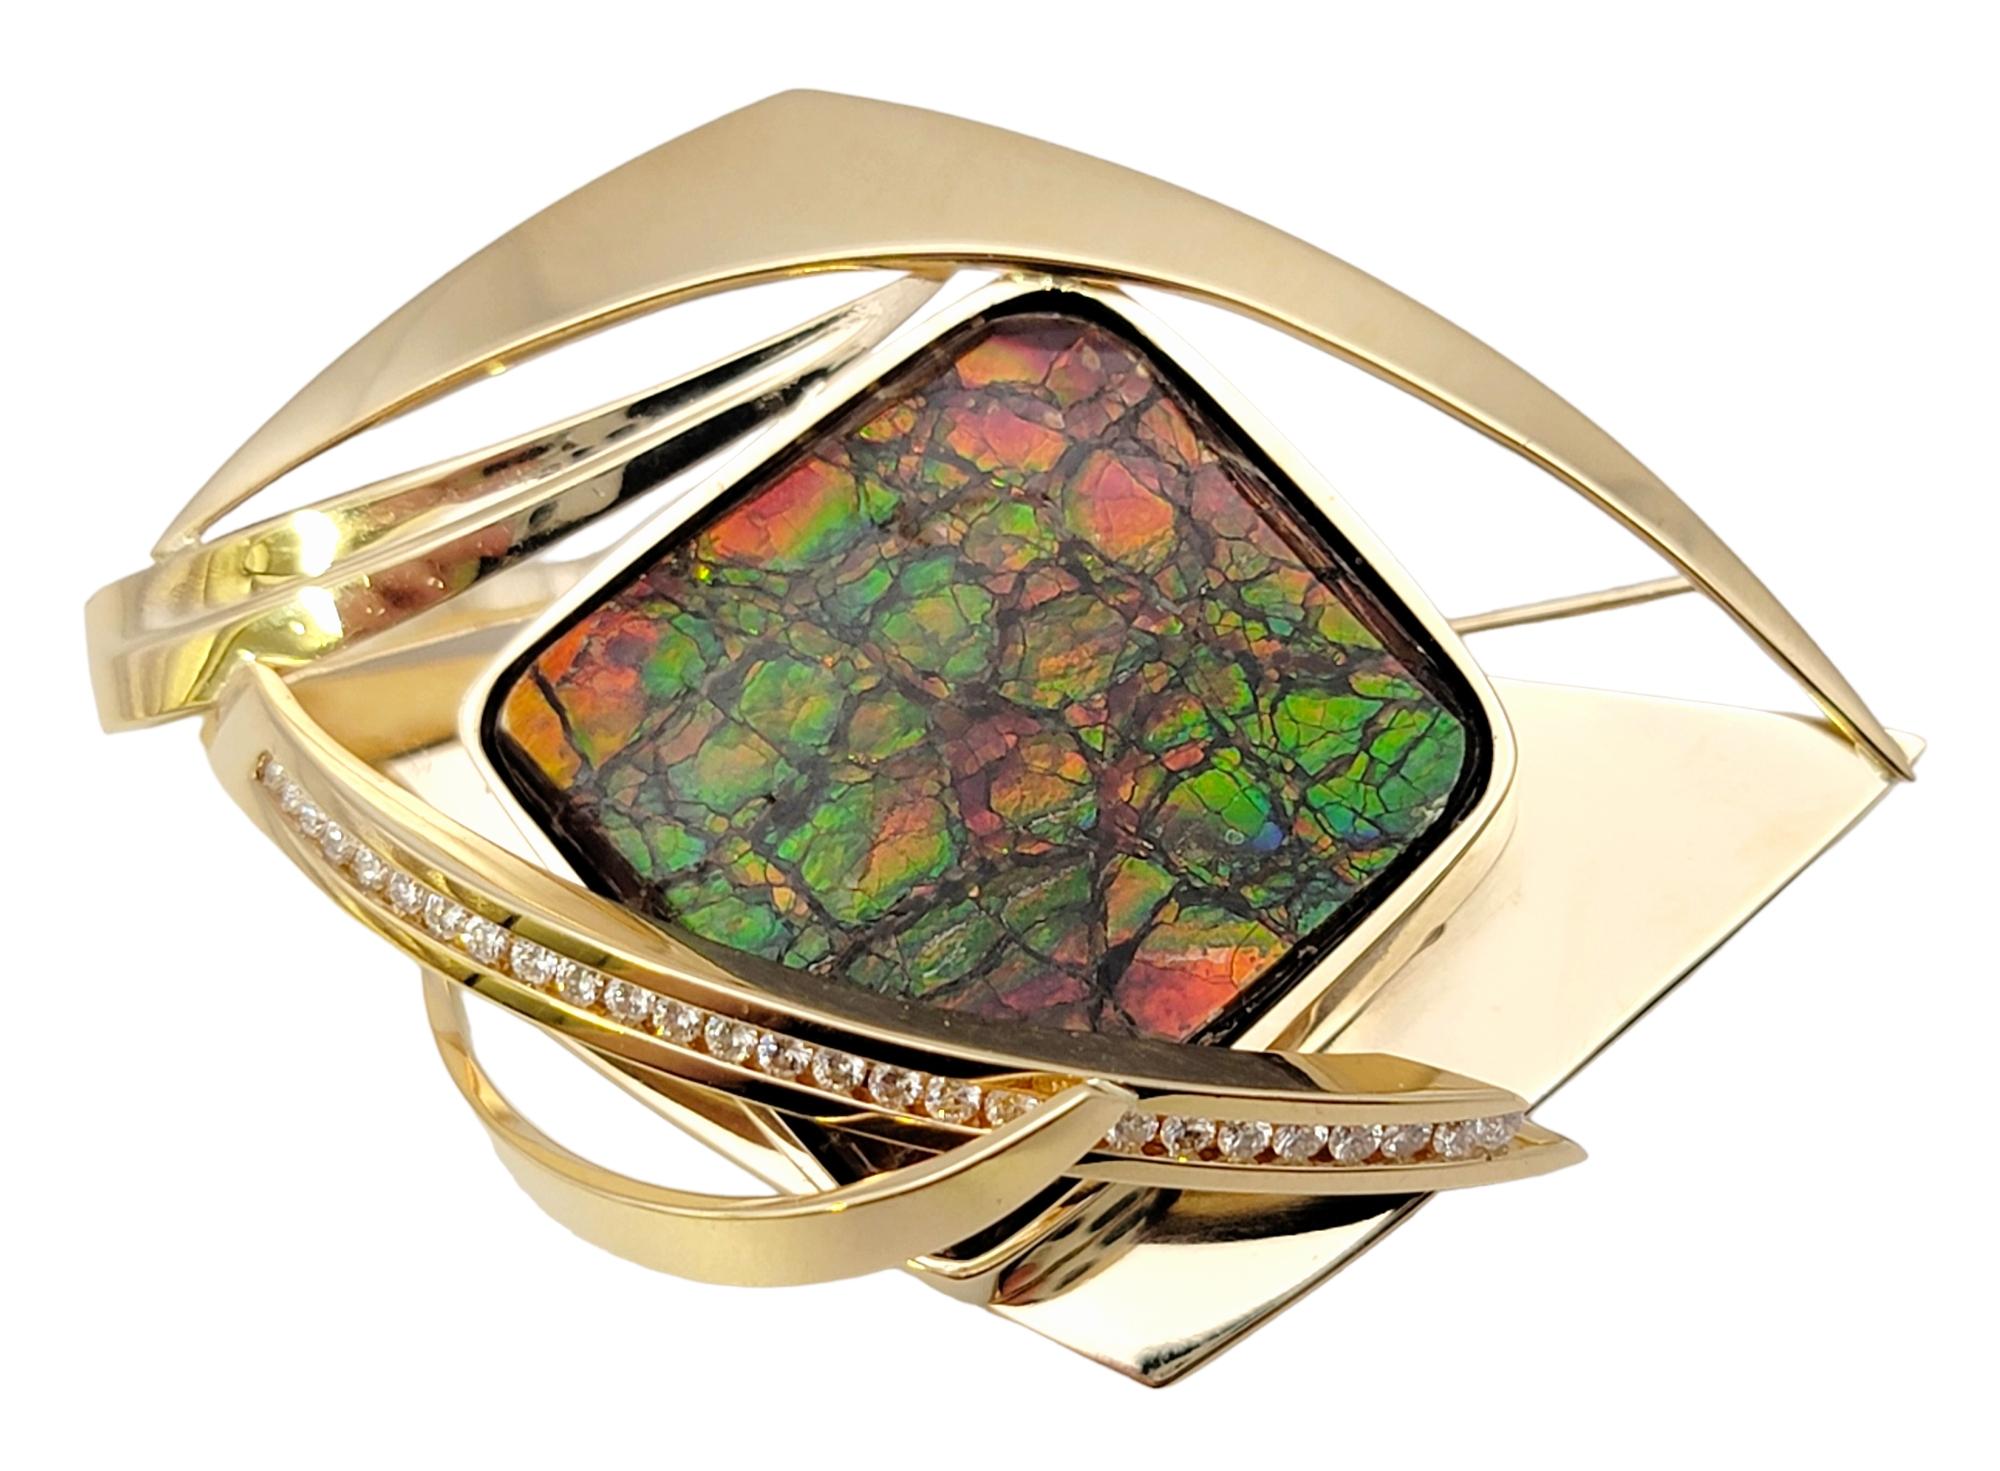 Captivating ammolite cabochon brooch adorned with dazzling natural diamonds. This radiant accessory effortlessly combines nature's rare gem and exquisite craftsmanship, resulting in a wearable work of art that is bound to mesmerize.

At the heart of